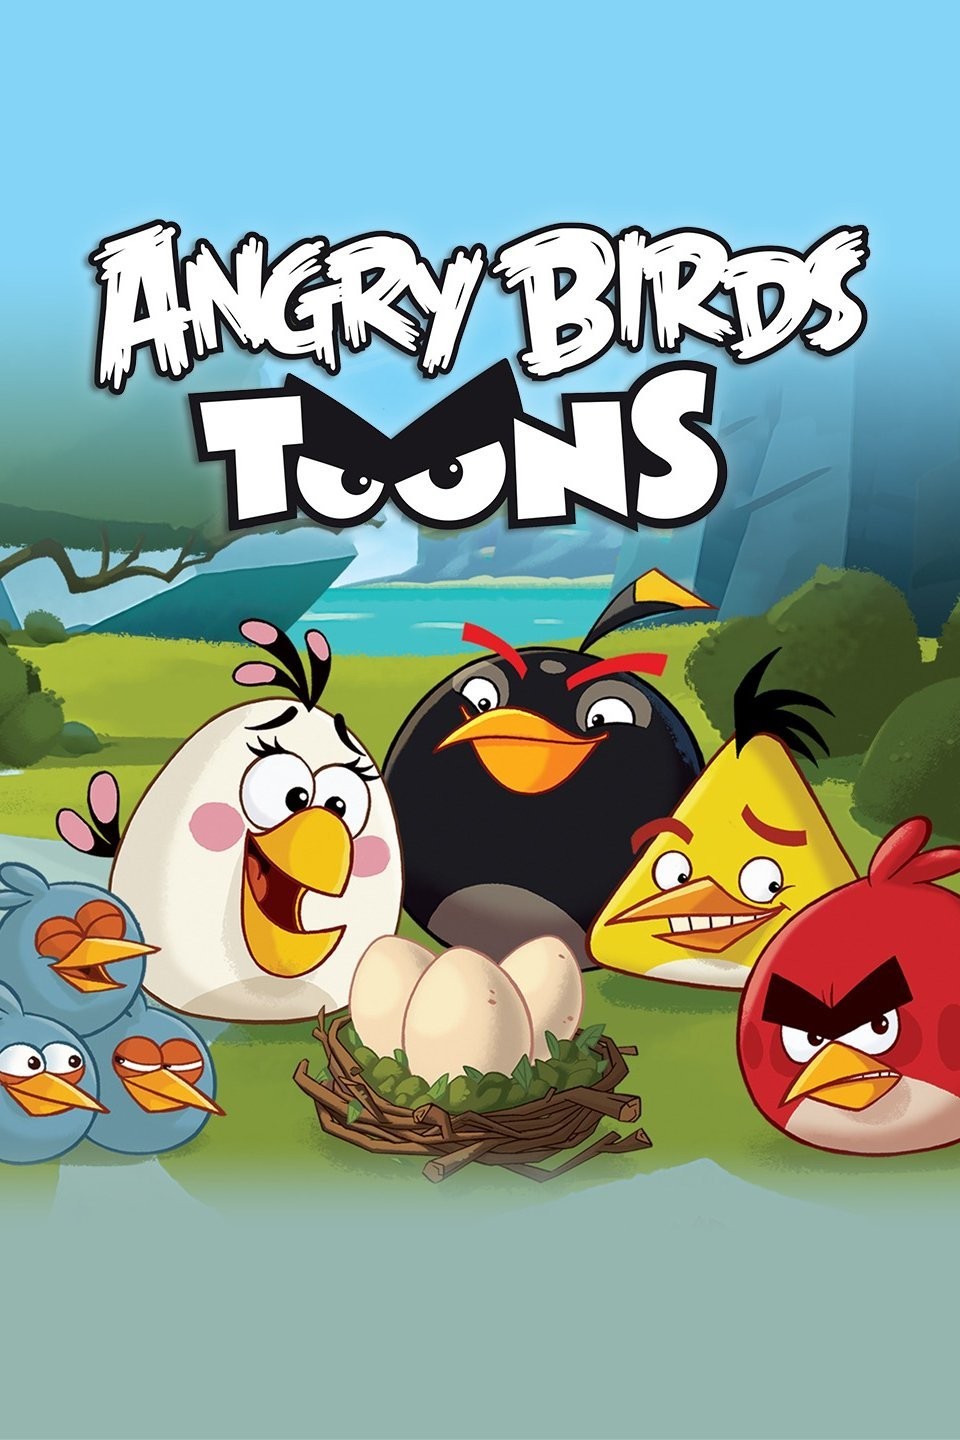 Bubbles (Angry Birds) Fan Casting